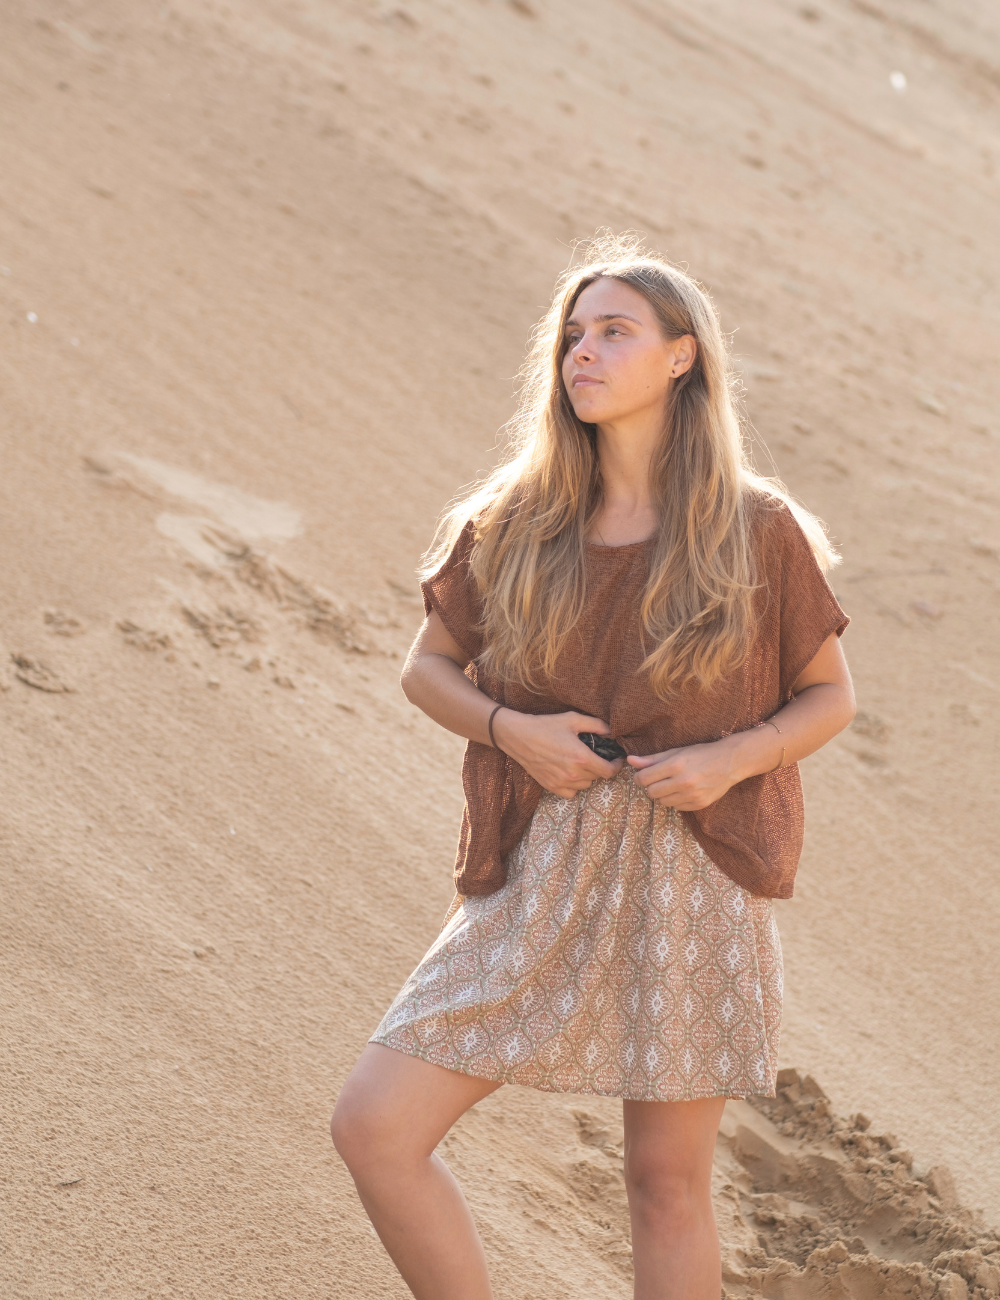 
                  
                    woman dressed in light coloured retro patterned mini dress with oversized net rust top in Indian desert
                  
                